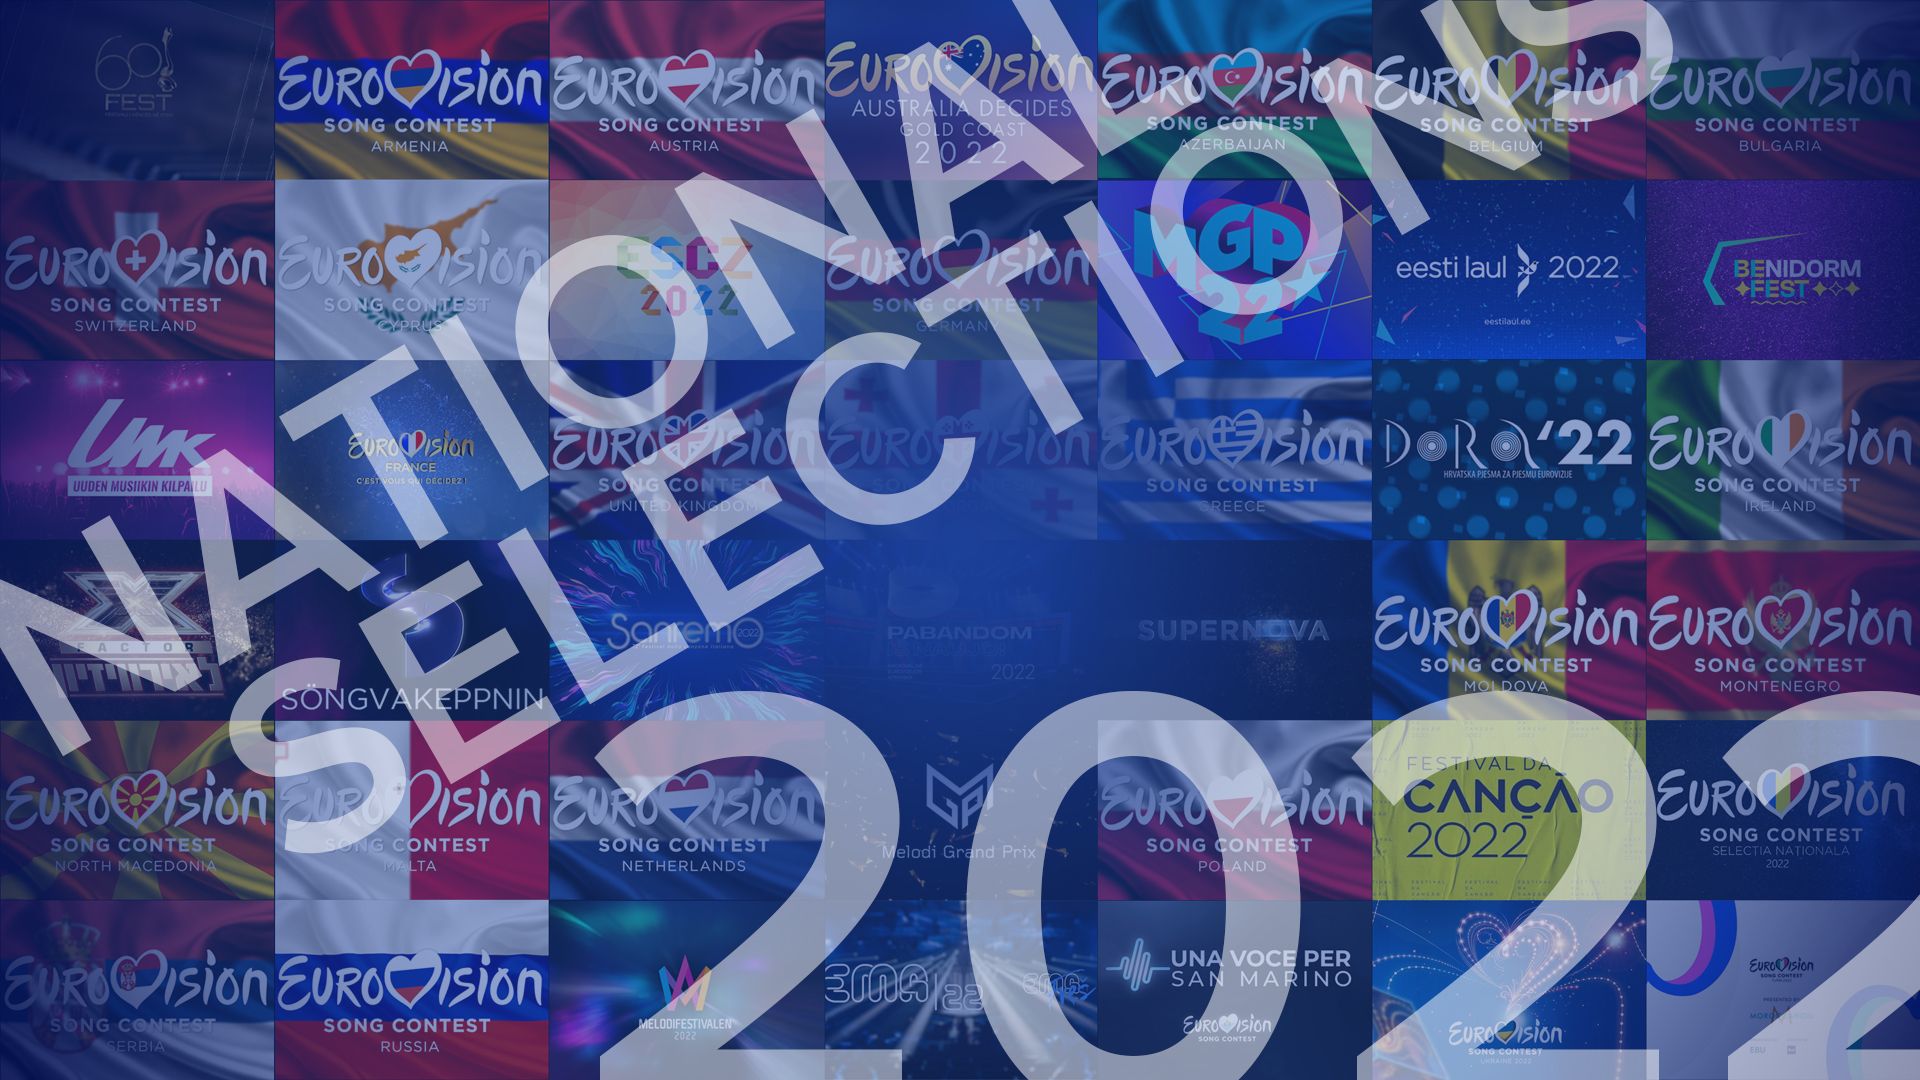 OurVision - National Selections 2022 Preview